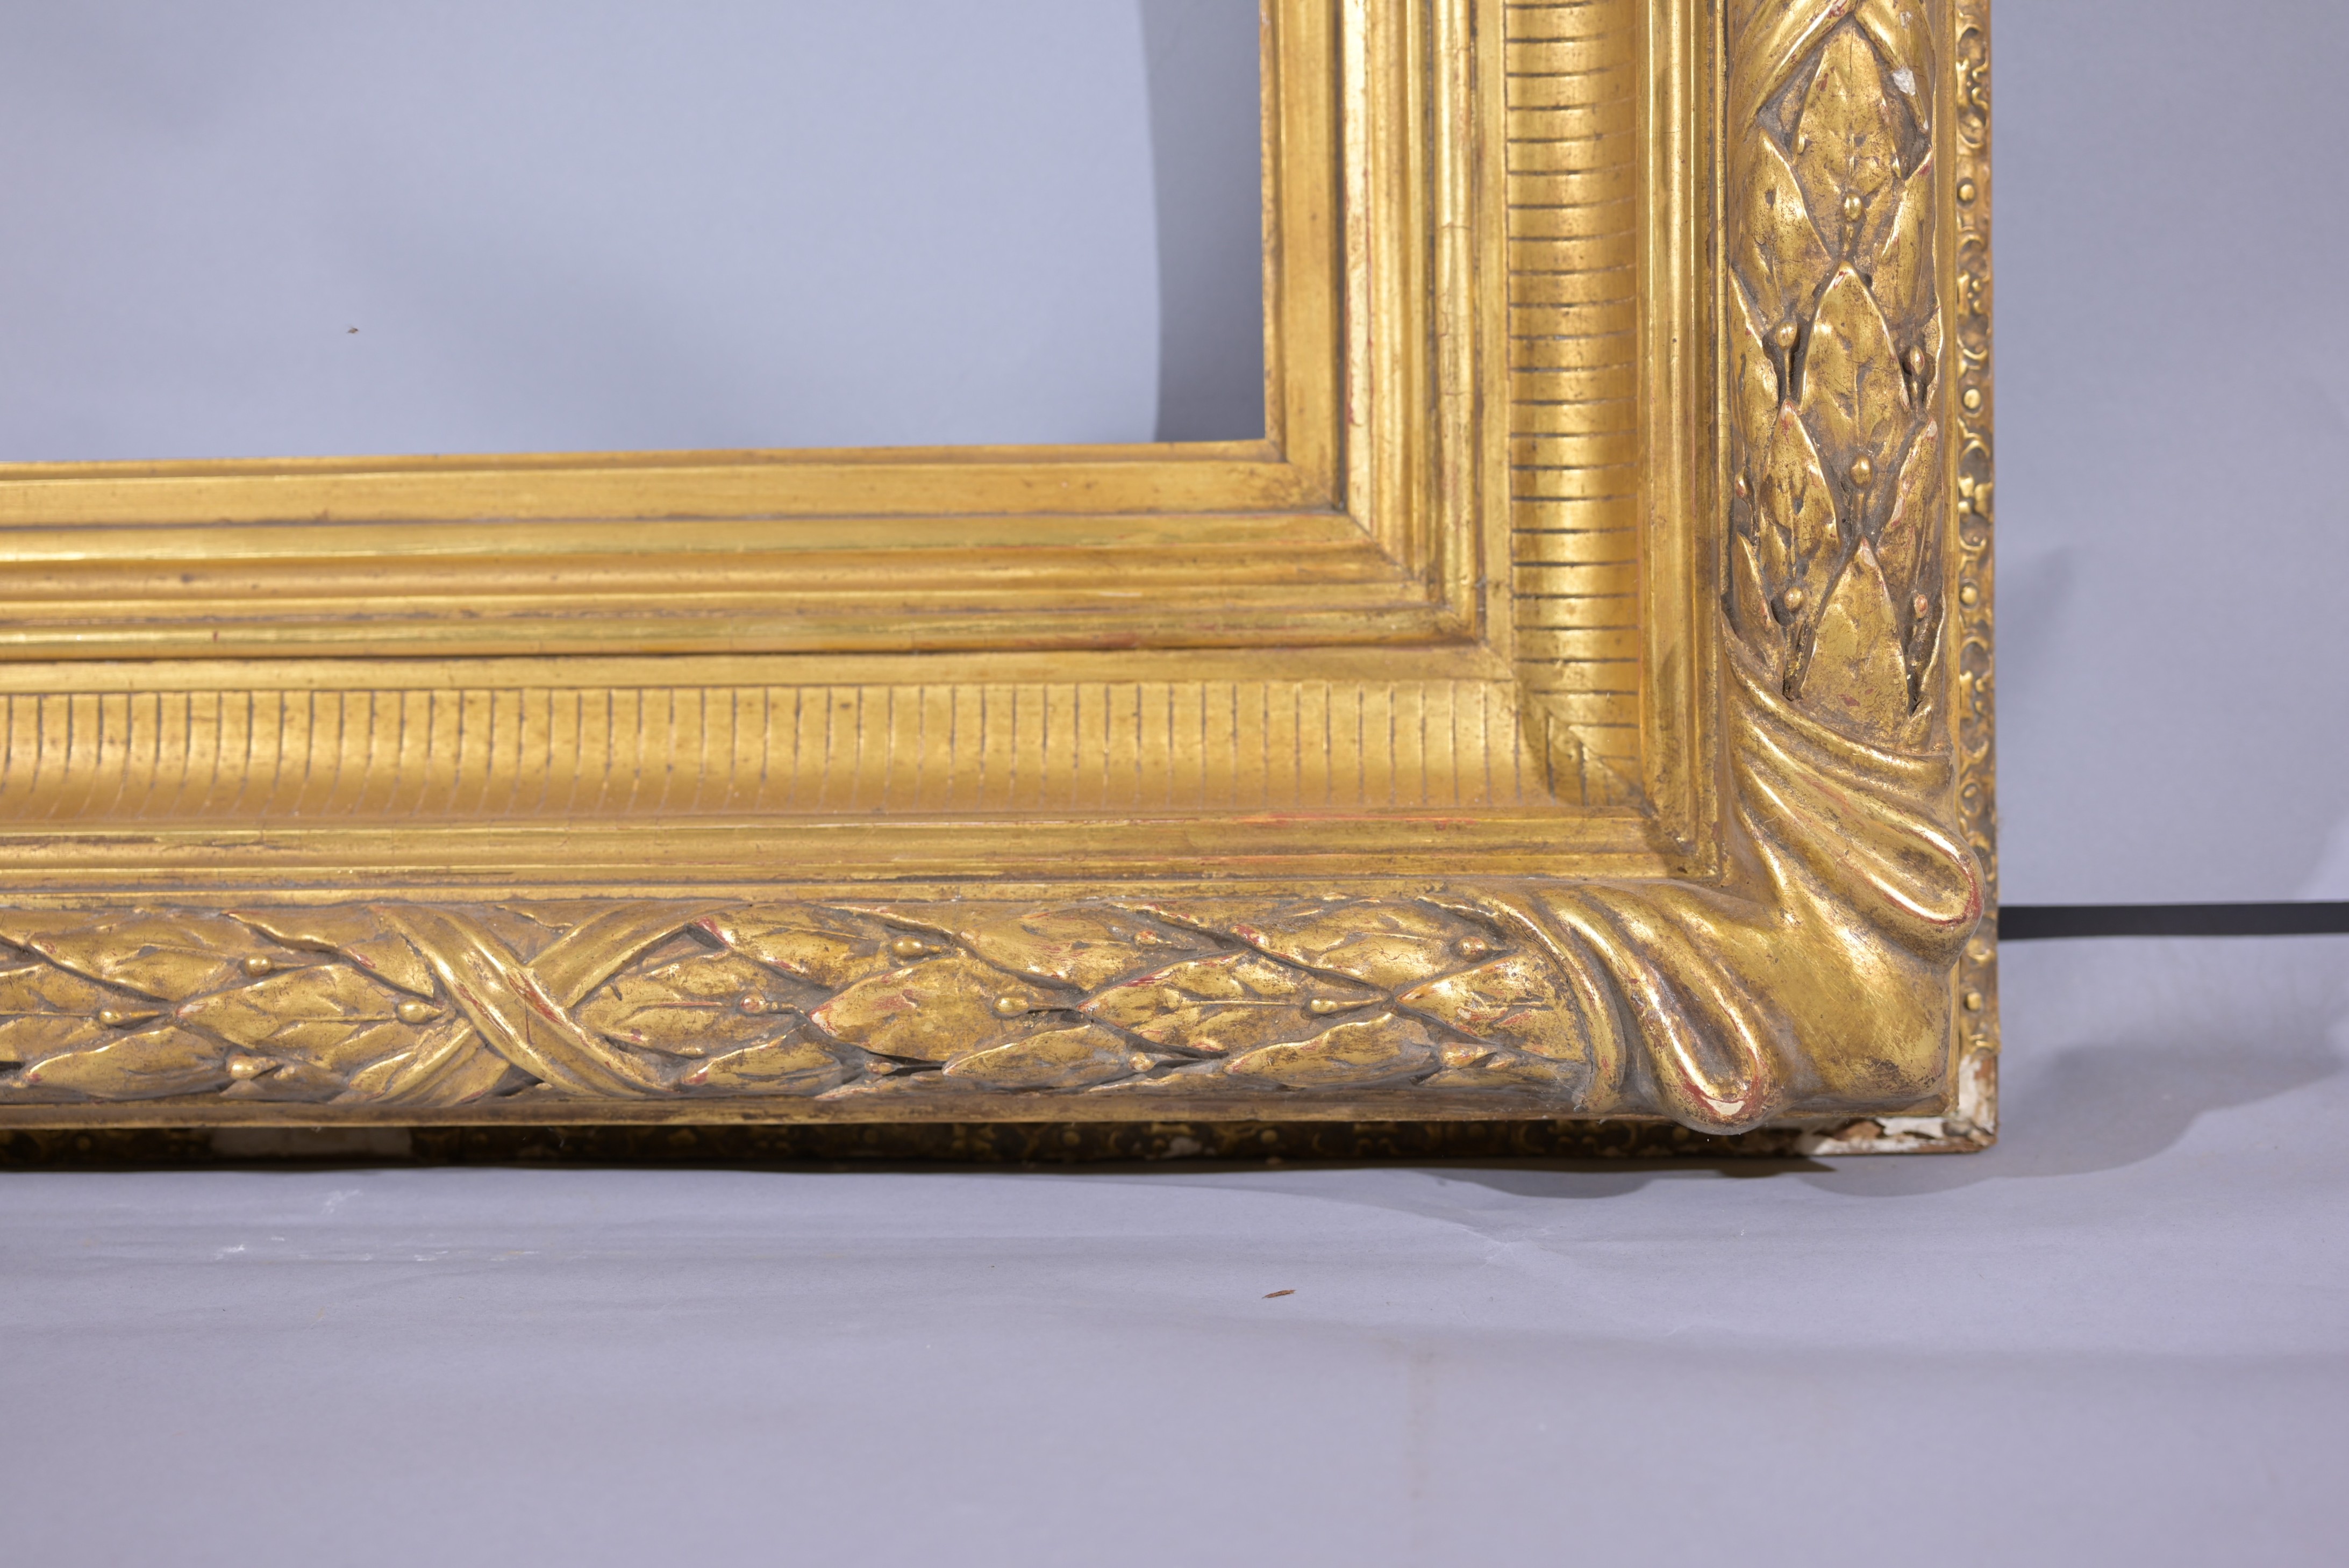 Large 19th C. Gilt/Fluted Cove Frame - 45.5 x 34.5 - Image 5 of 7